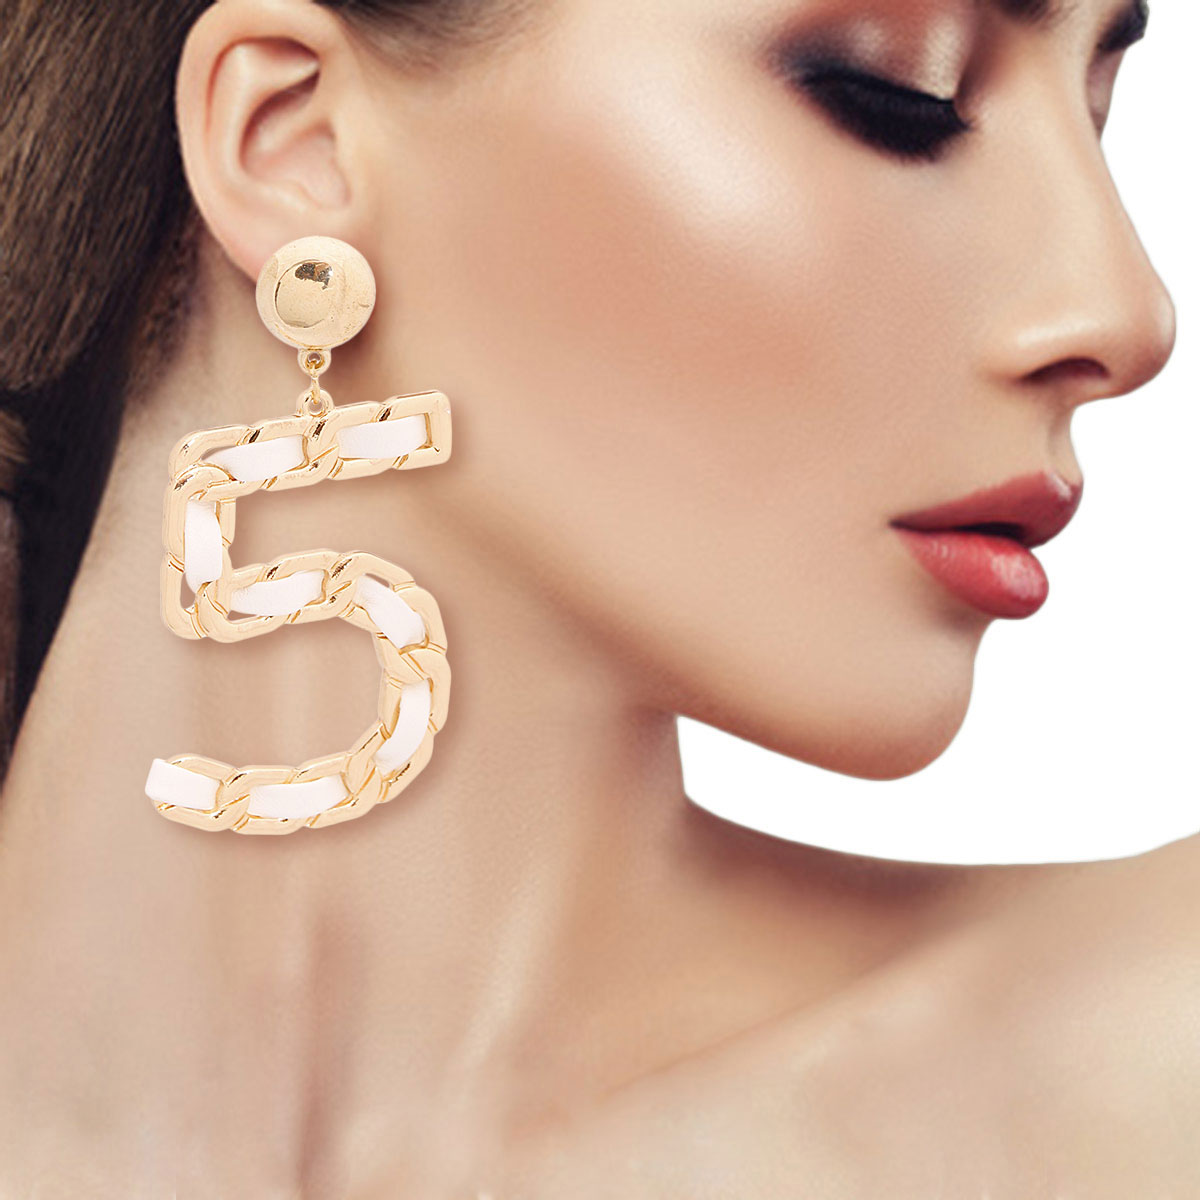 White and Gold No 5 Earrings